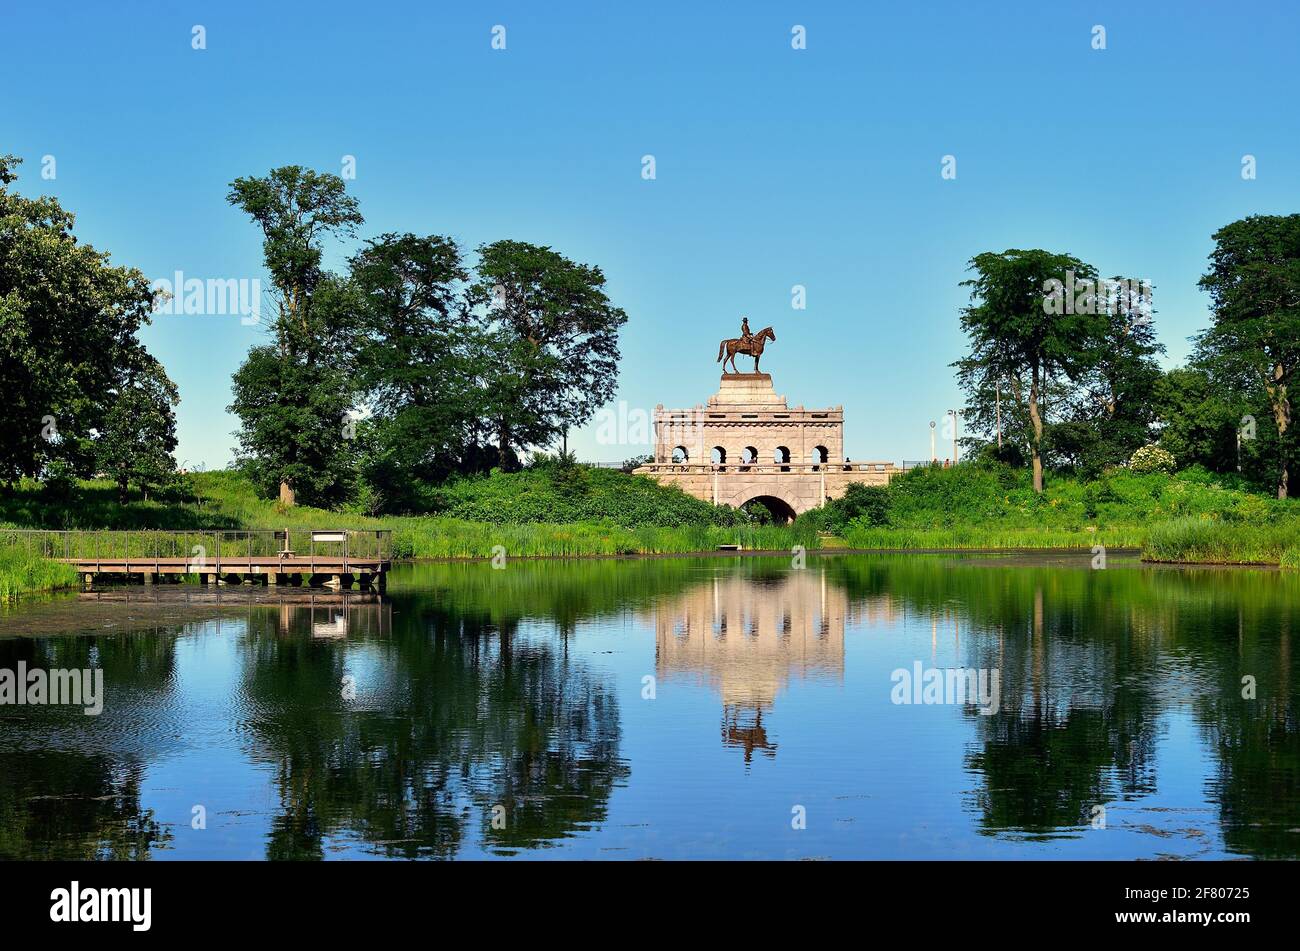 Chicago, Illinois, USA. The Ulysses S. Grant Memorial reflecting in the South Pond at Lincoln Park Zoo on a summer afternoon. Stock Photo